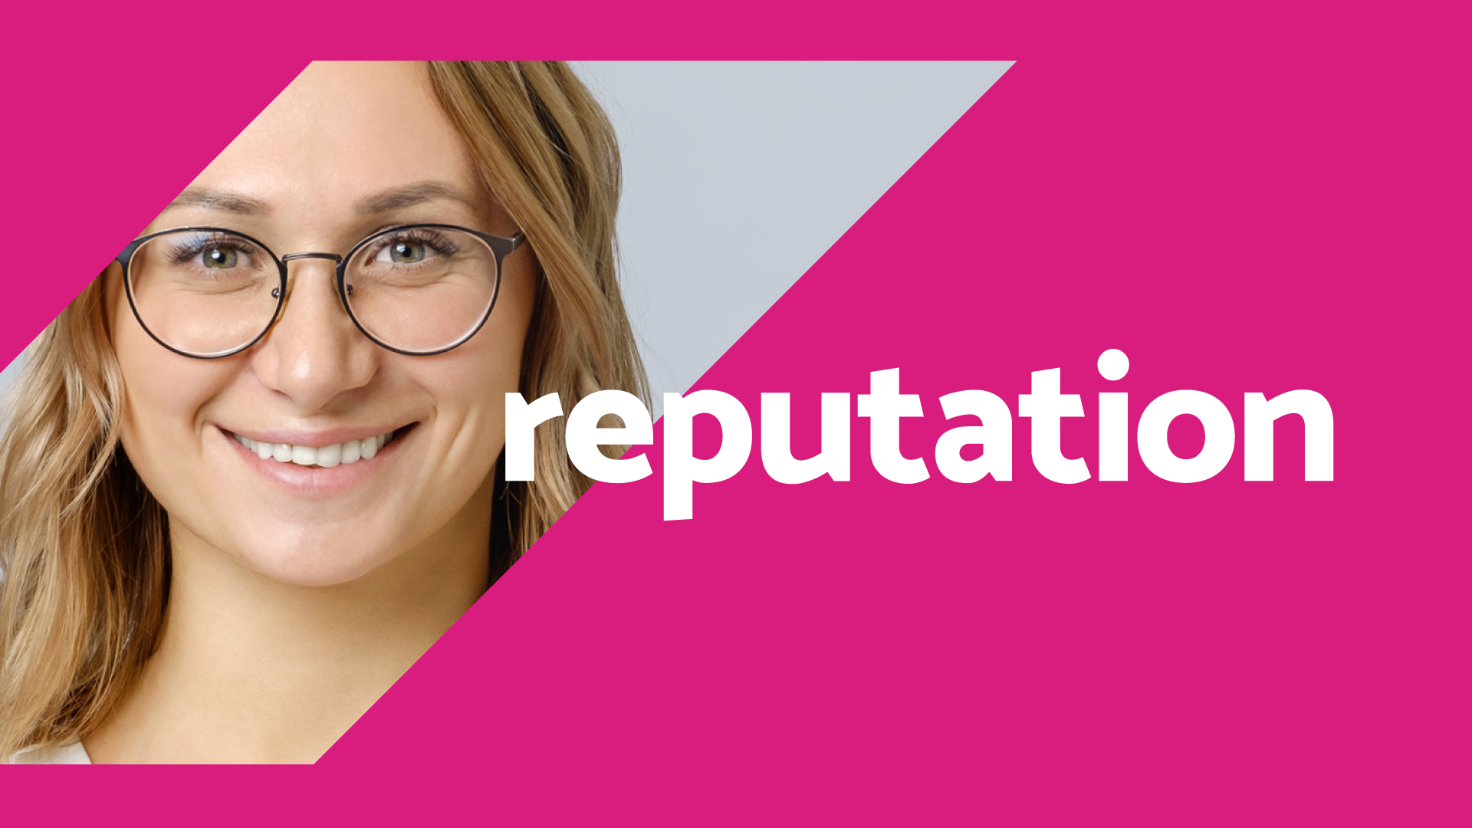 A headshot behind a pink border with the word "reputation" overlaid.